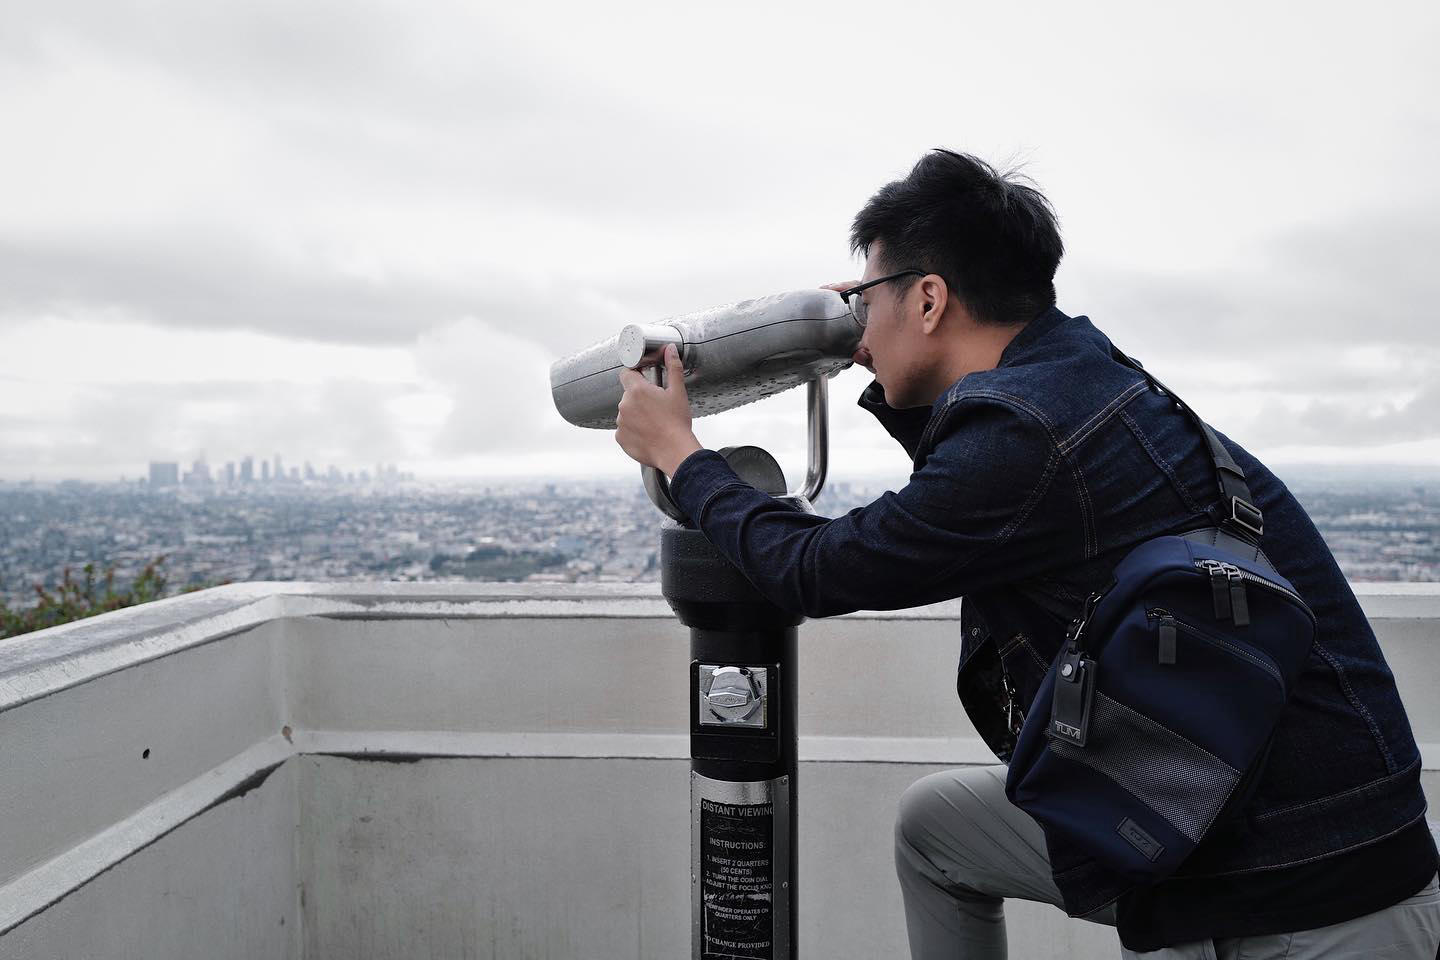 image  1 Vincent Cuk - Observing the city from this point #perfectingthejourney #tumihk #tumitravel #tumitrav